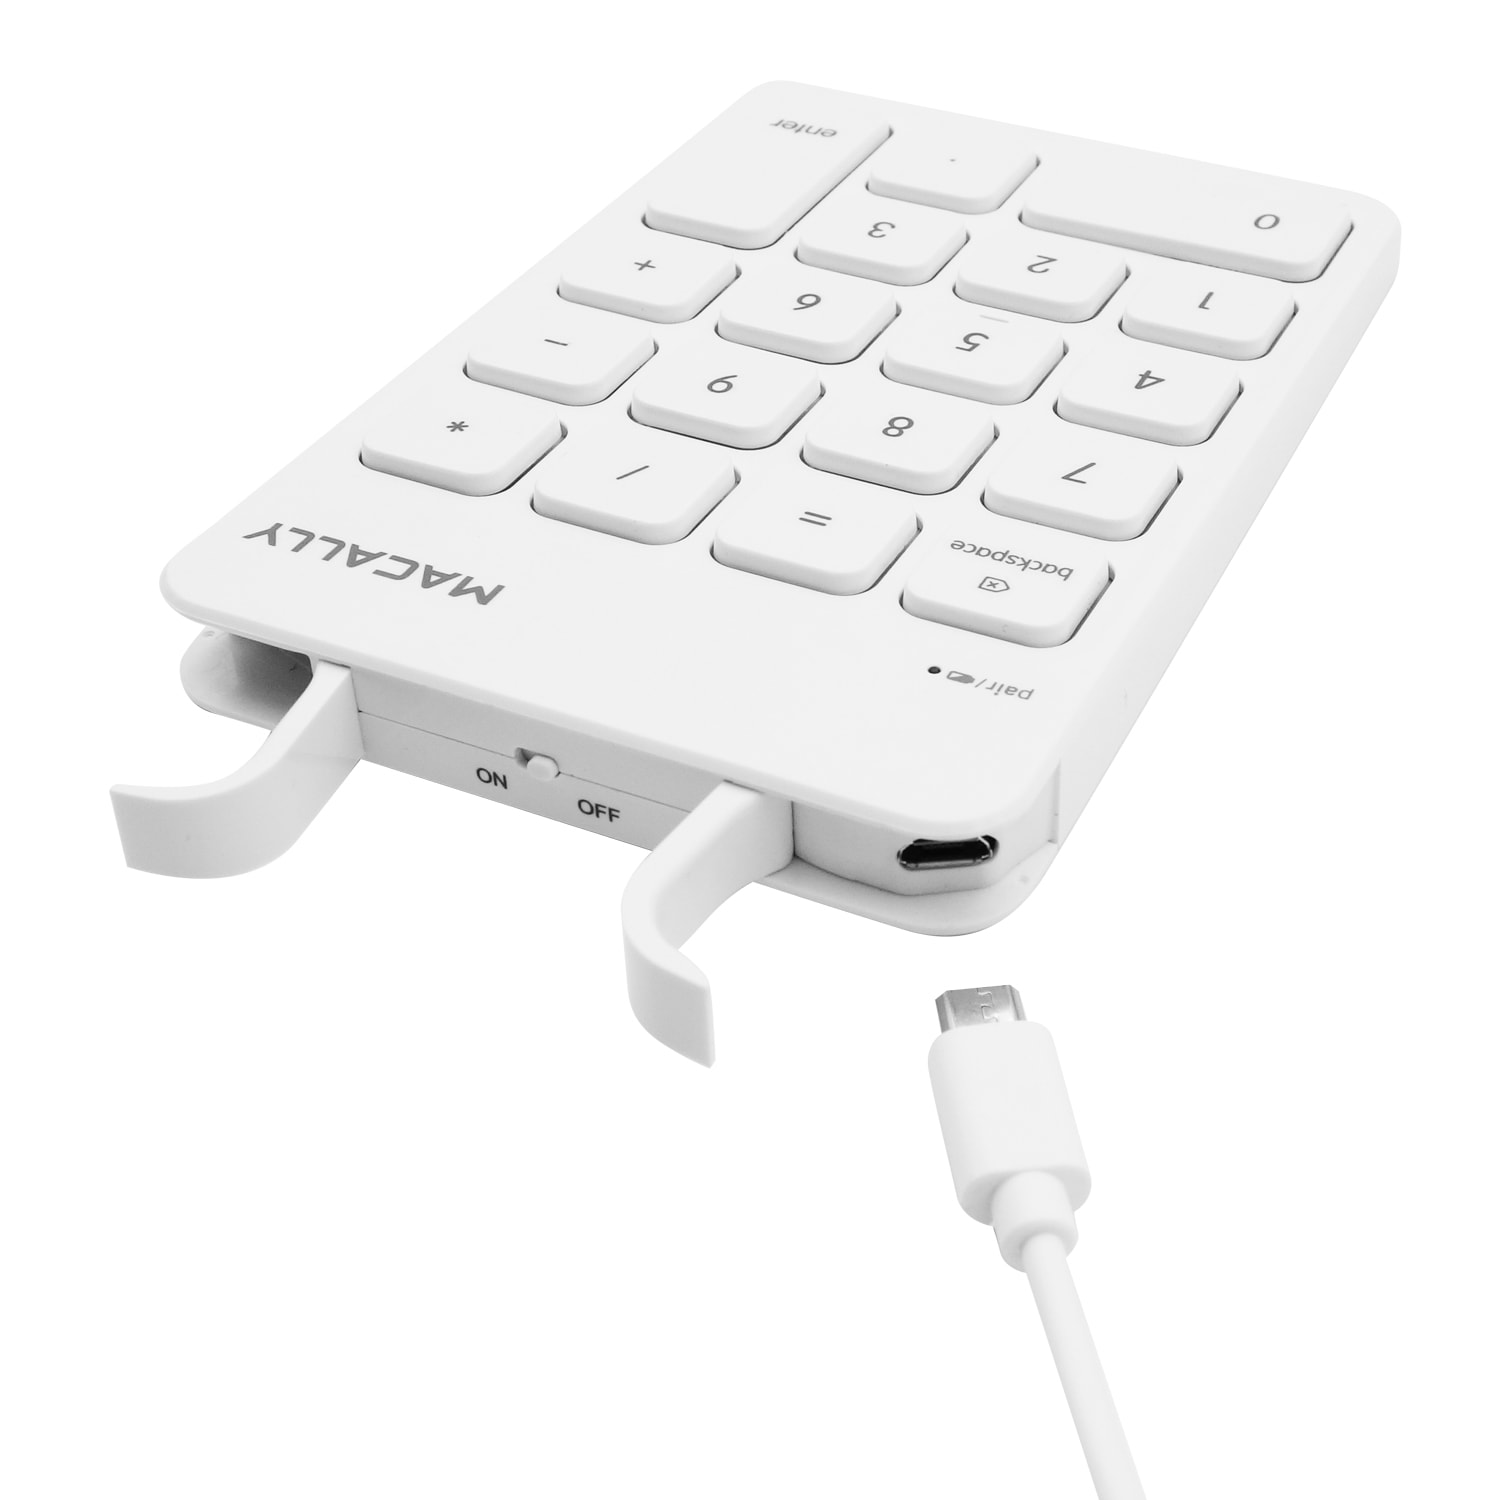 wireless keyboard with number pad